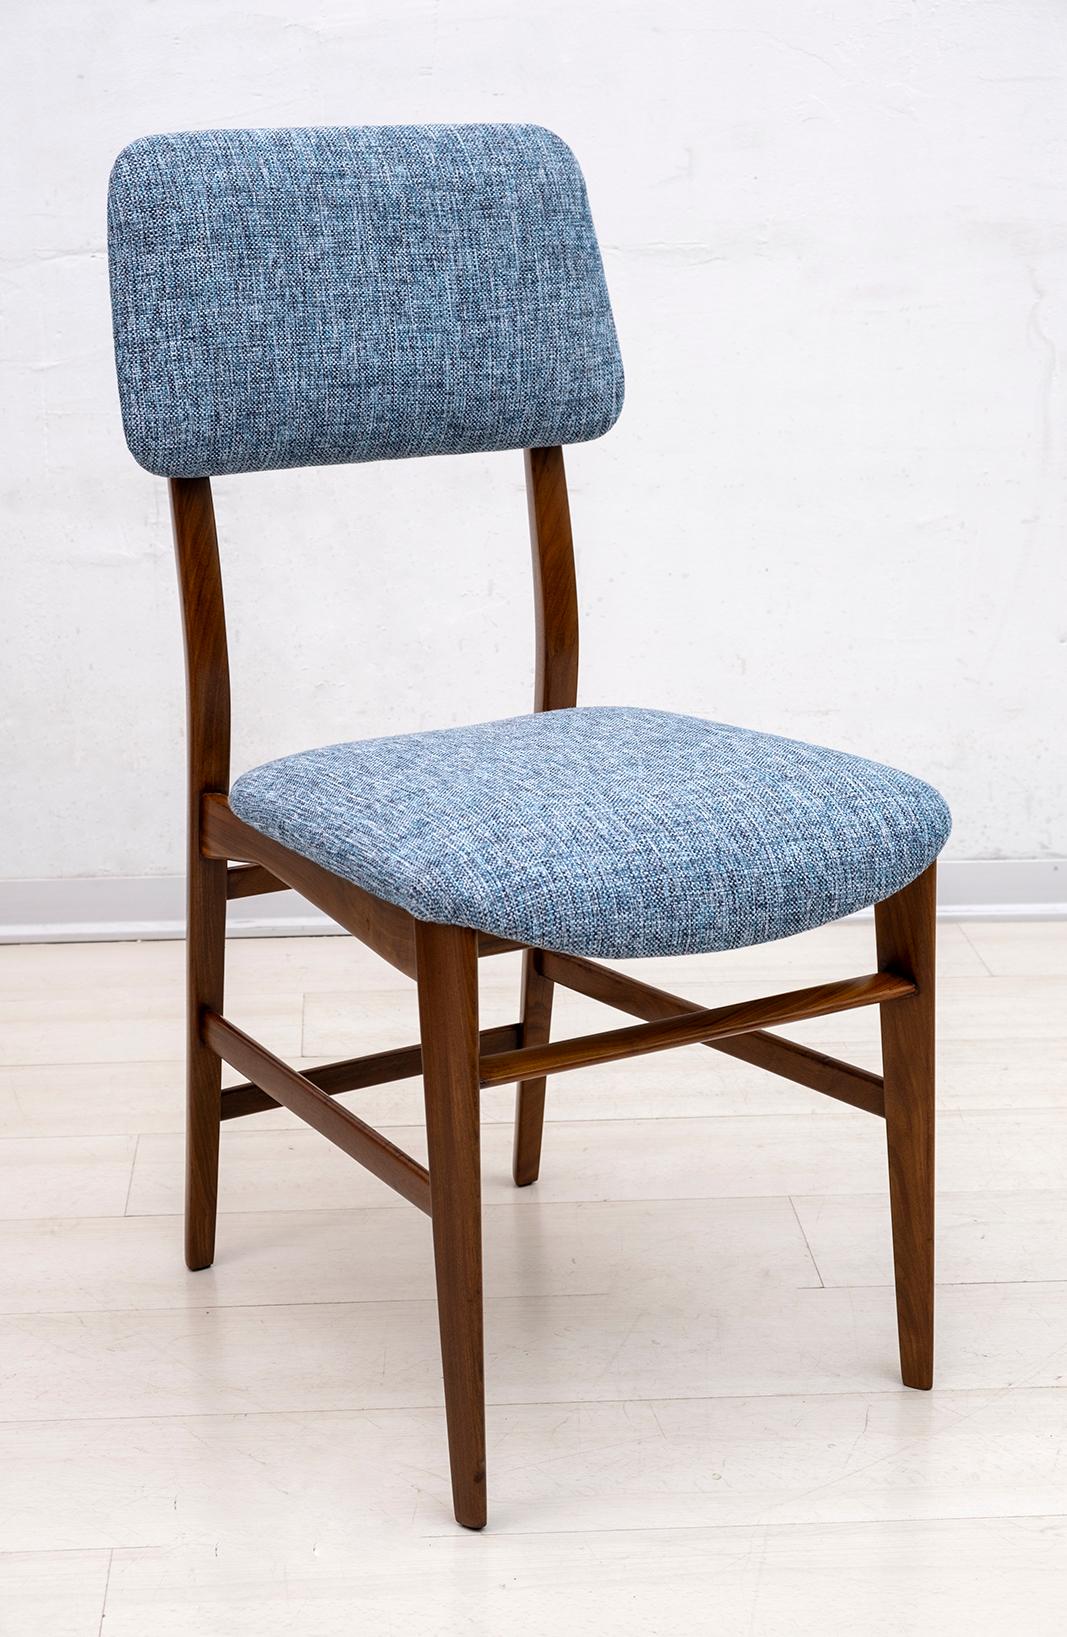 Six beautiful chairs designed by Edmondo Palutari for Dassi, the chairs are in teak and have been restored and covered with a new hemp fabric, similar to the original, Italy, 1950s.